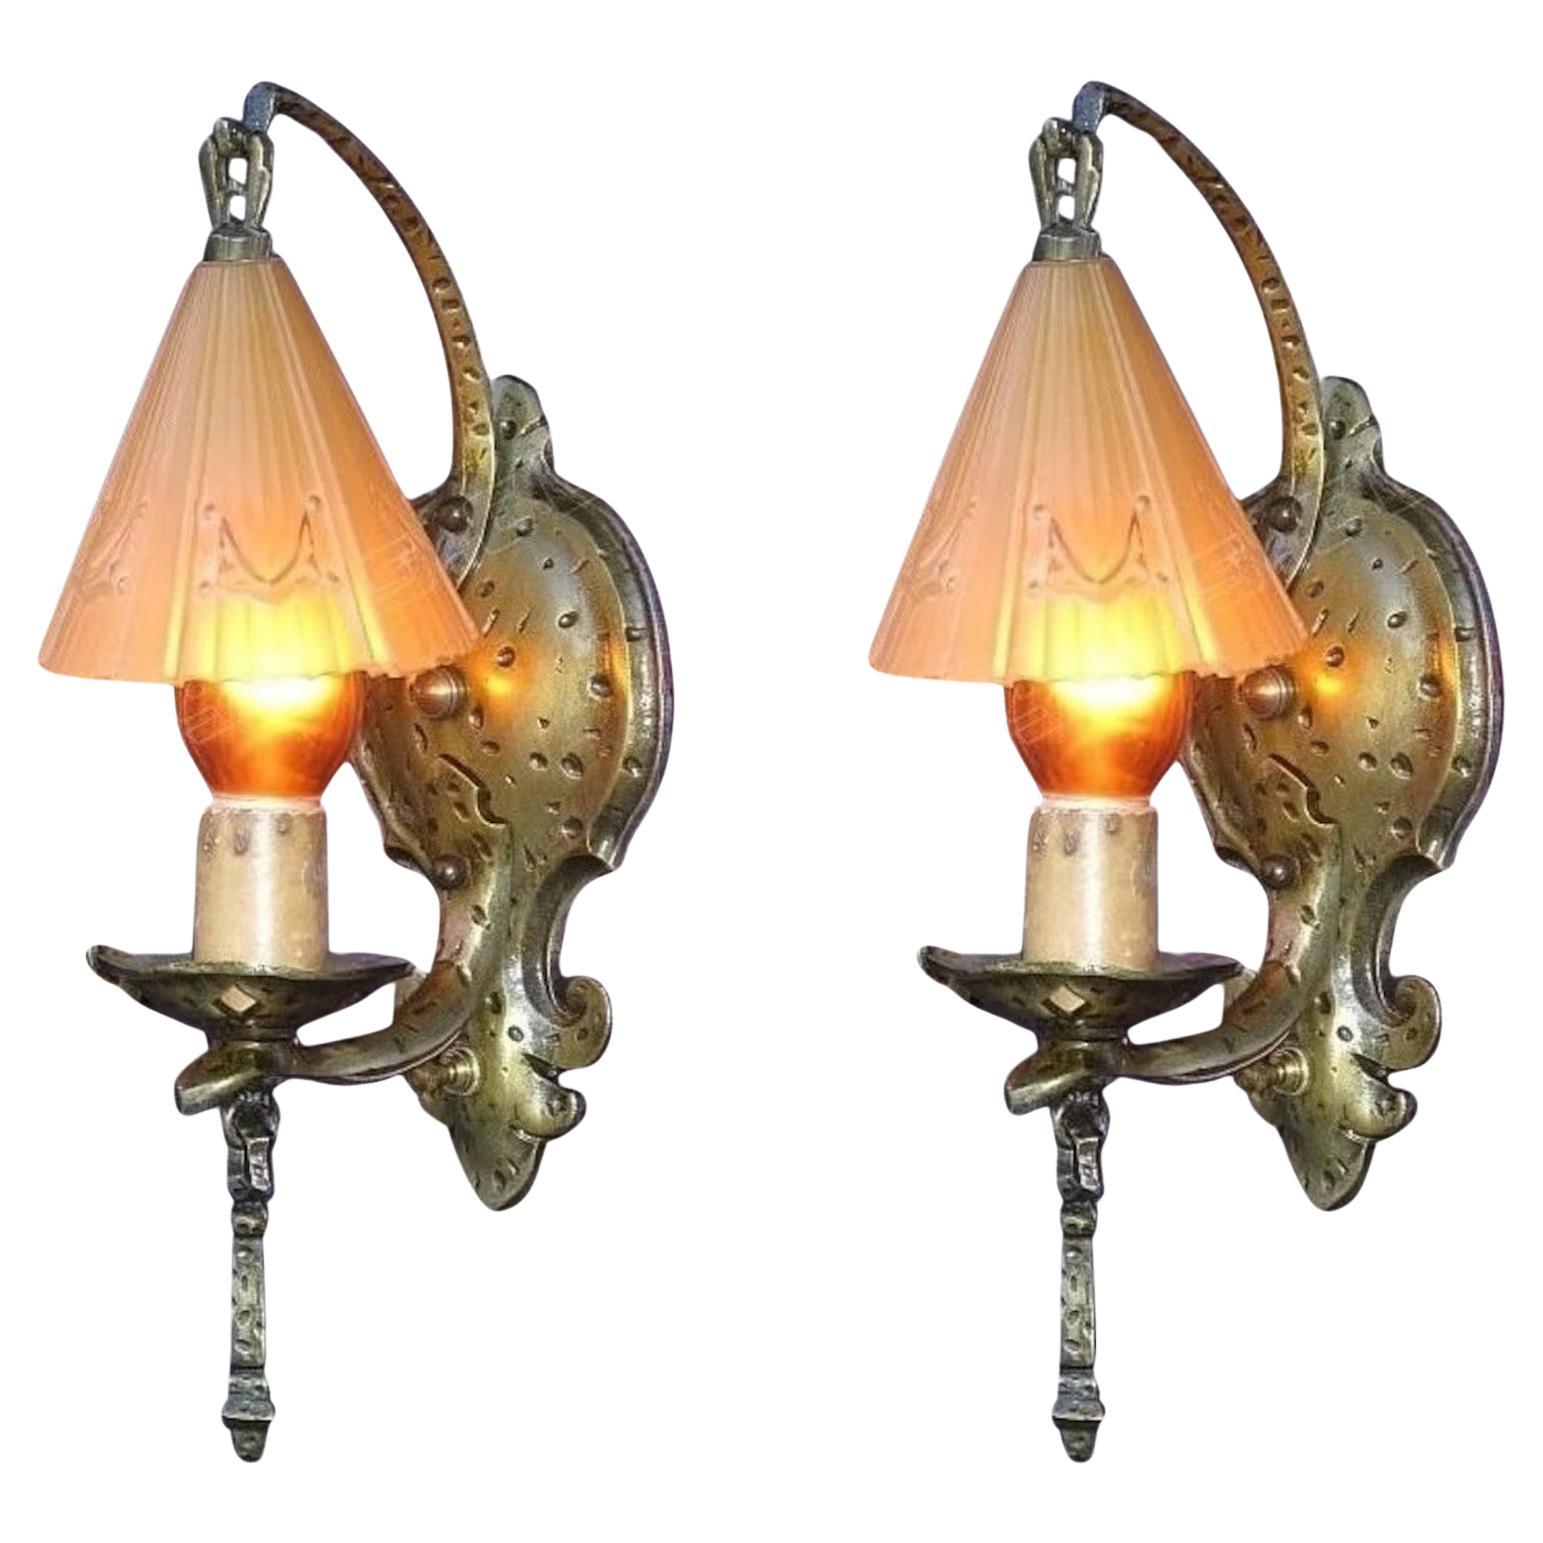 Vintage Storybook Wall Sconces 1930s priced per pair with 3 pr avaiable